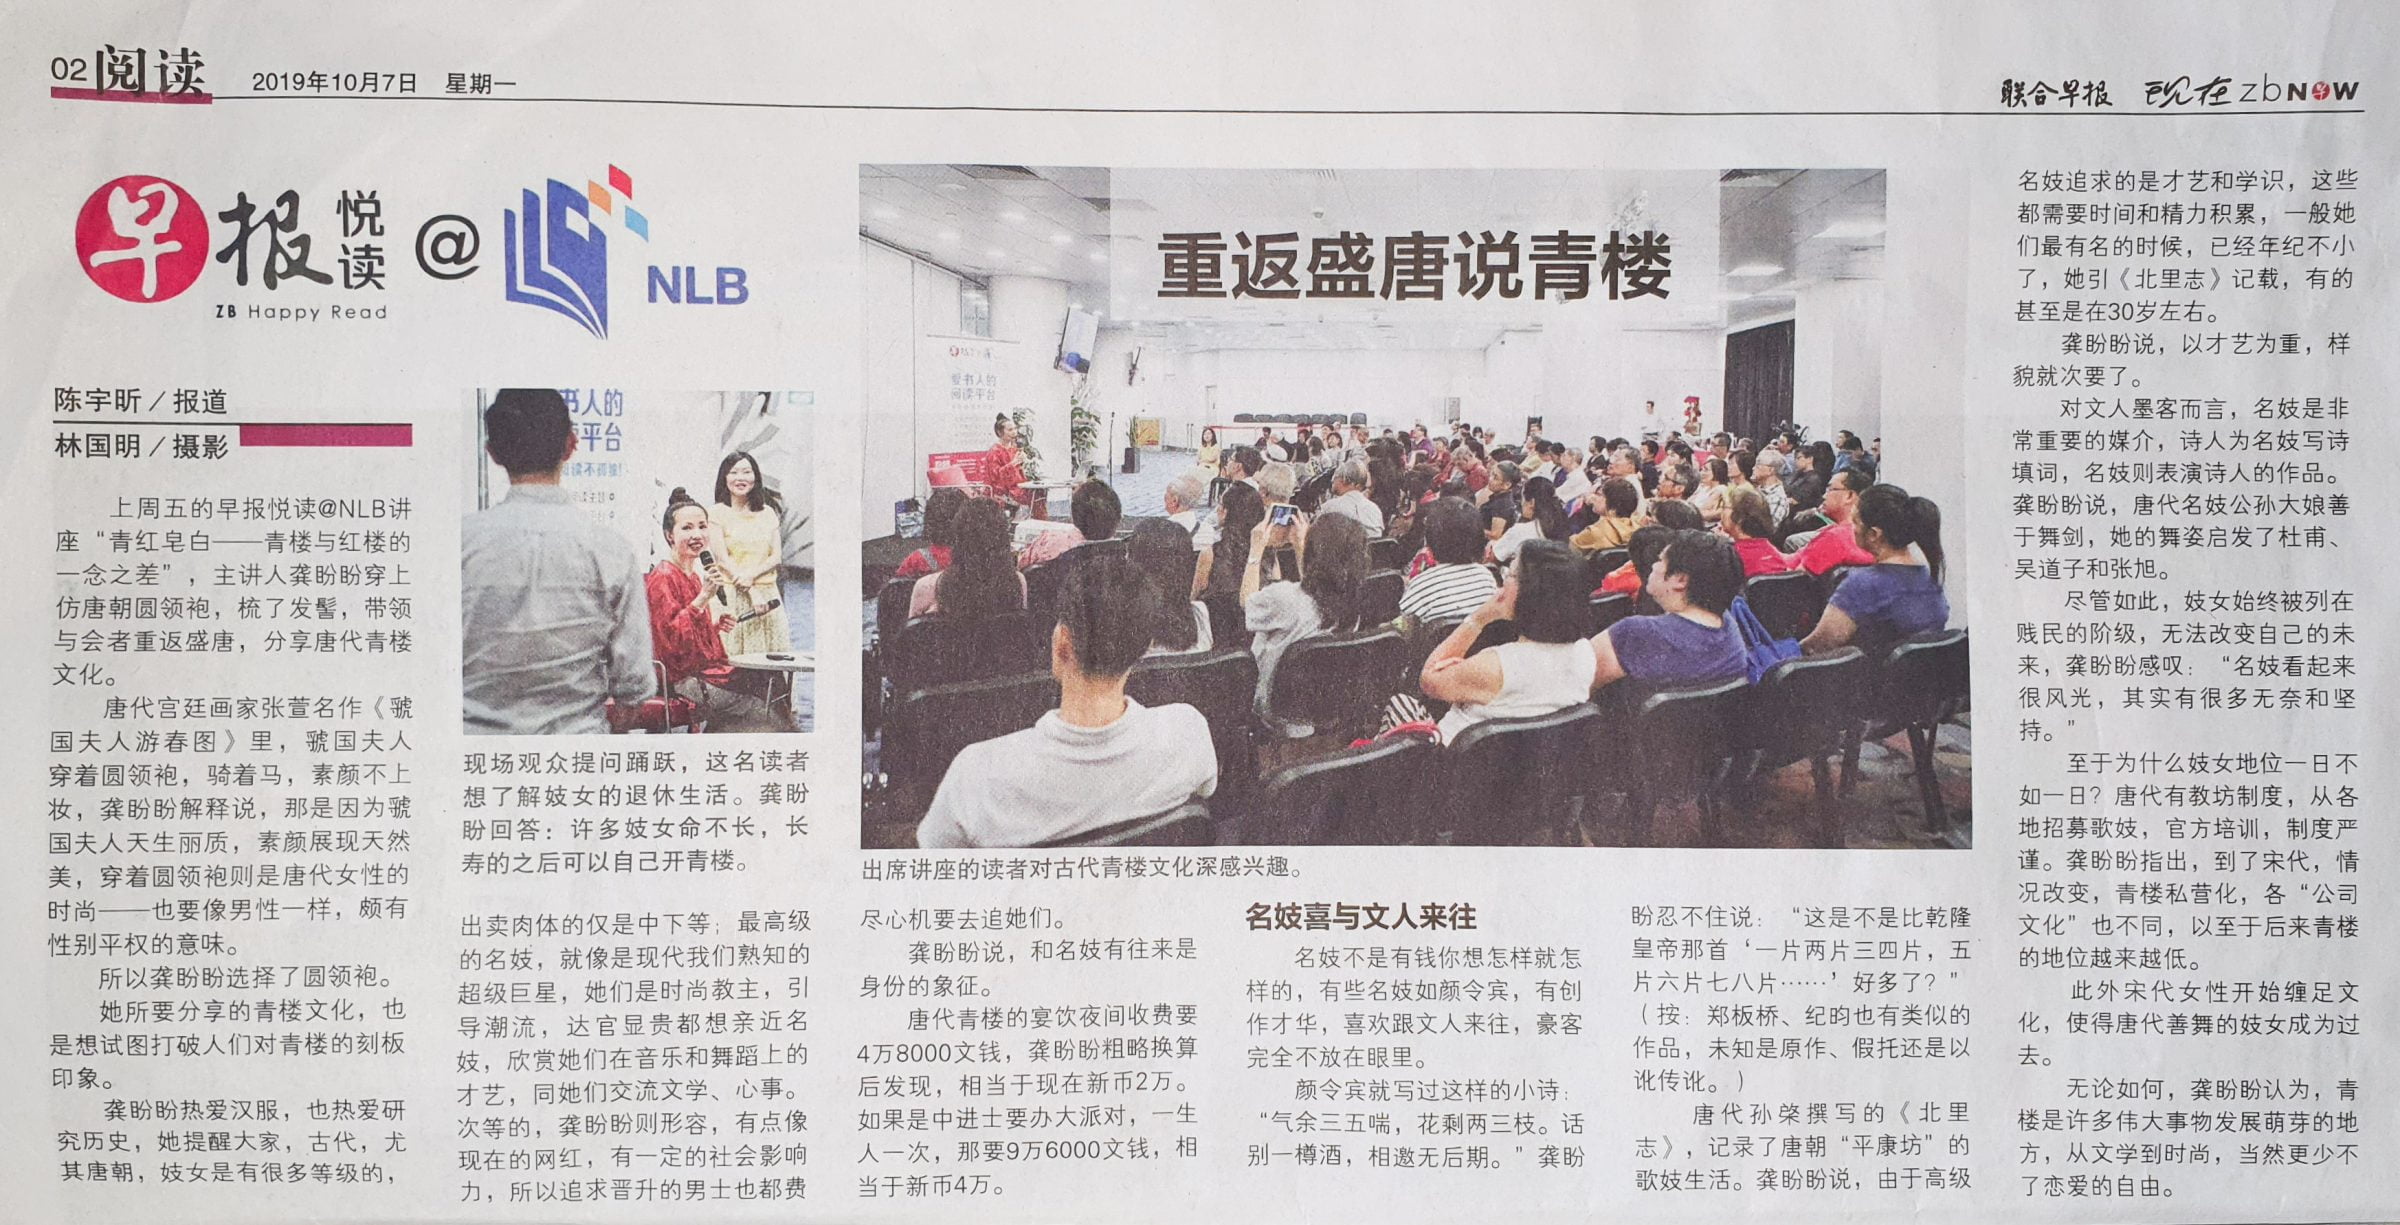 Lecture at the National Library on Tang era Courtesan culture